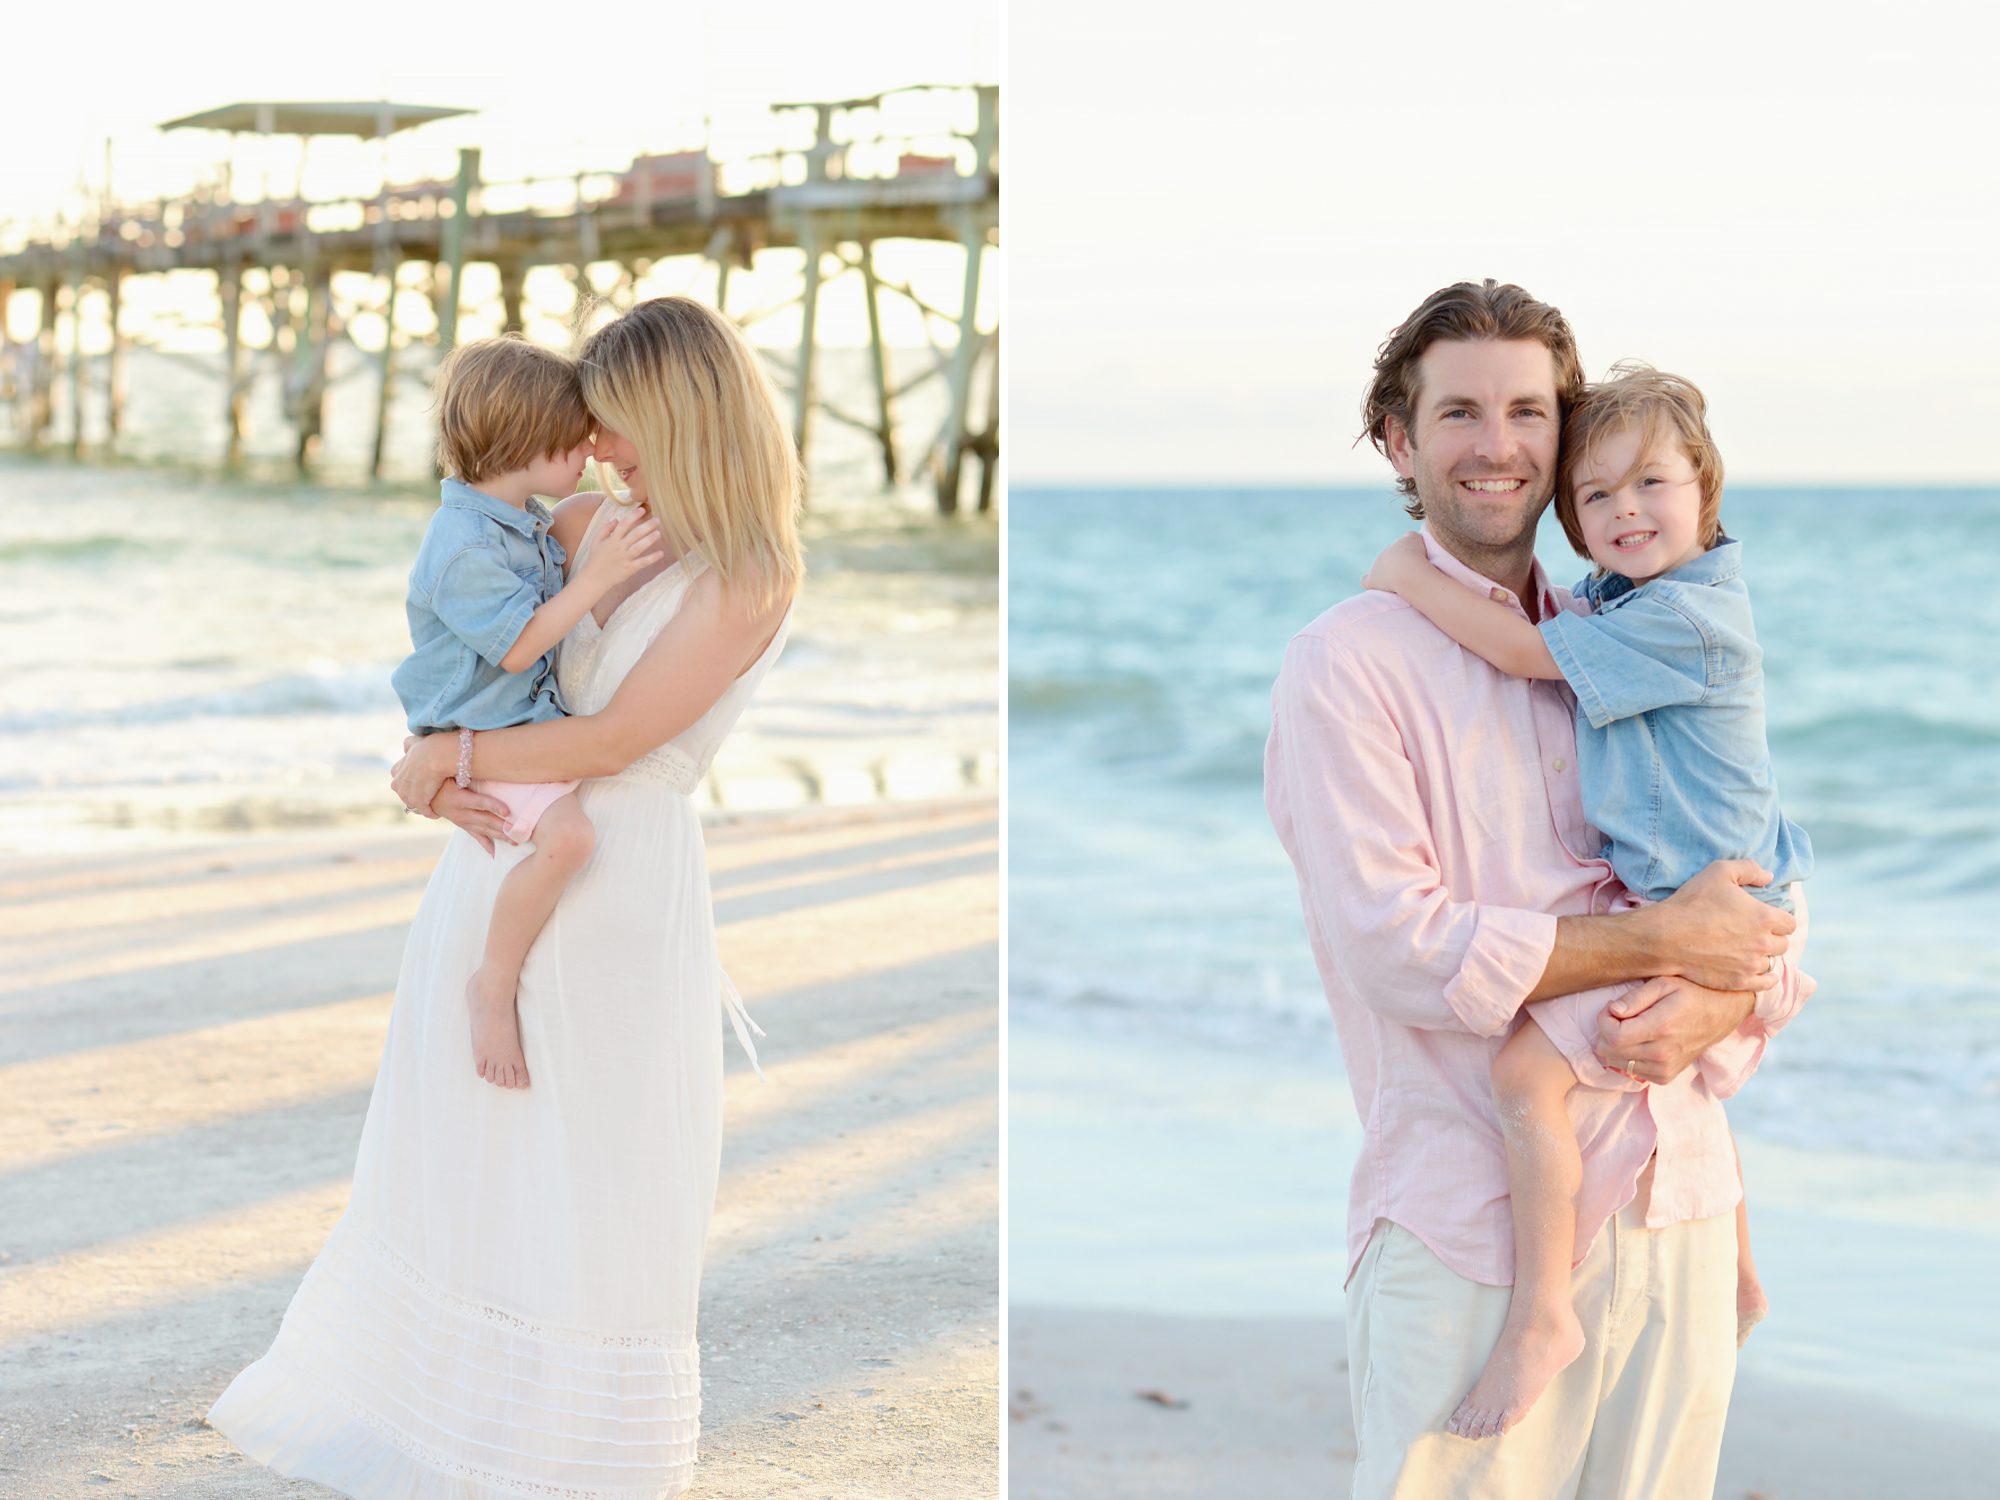 Family of 4 at Redington Shores Beach, FL getting fun family beach portraits in front of a rustic wooden pier.